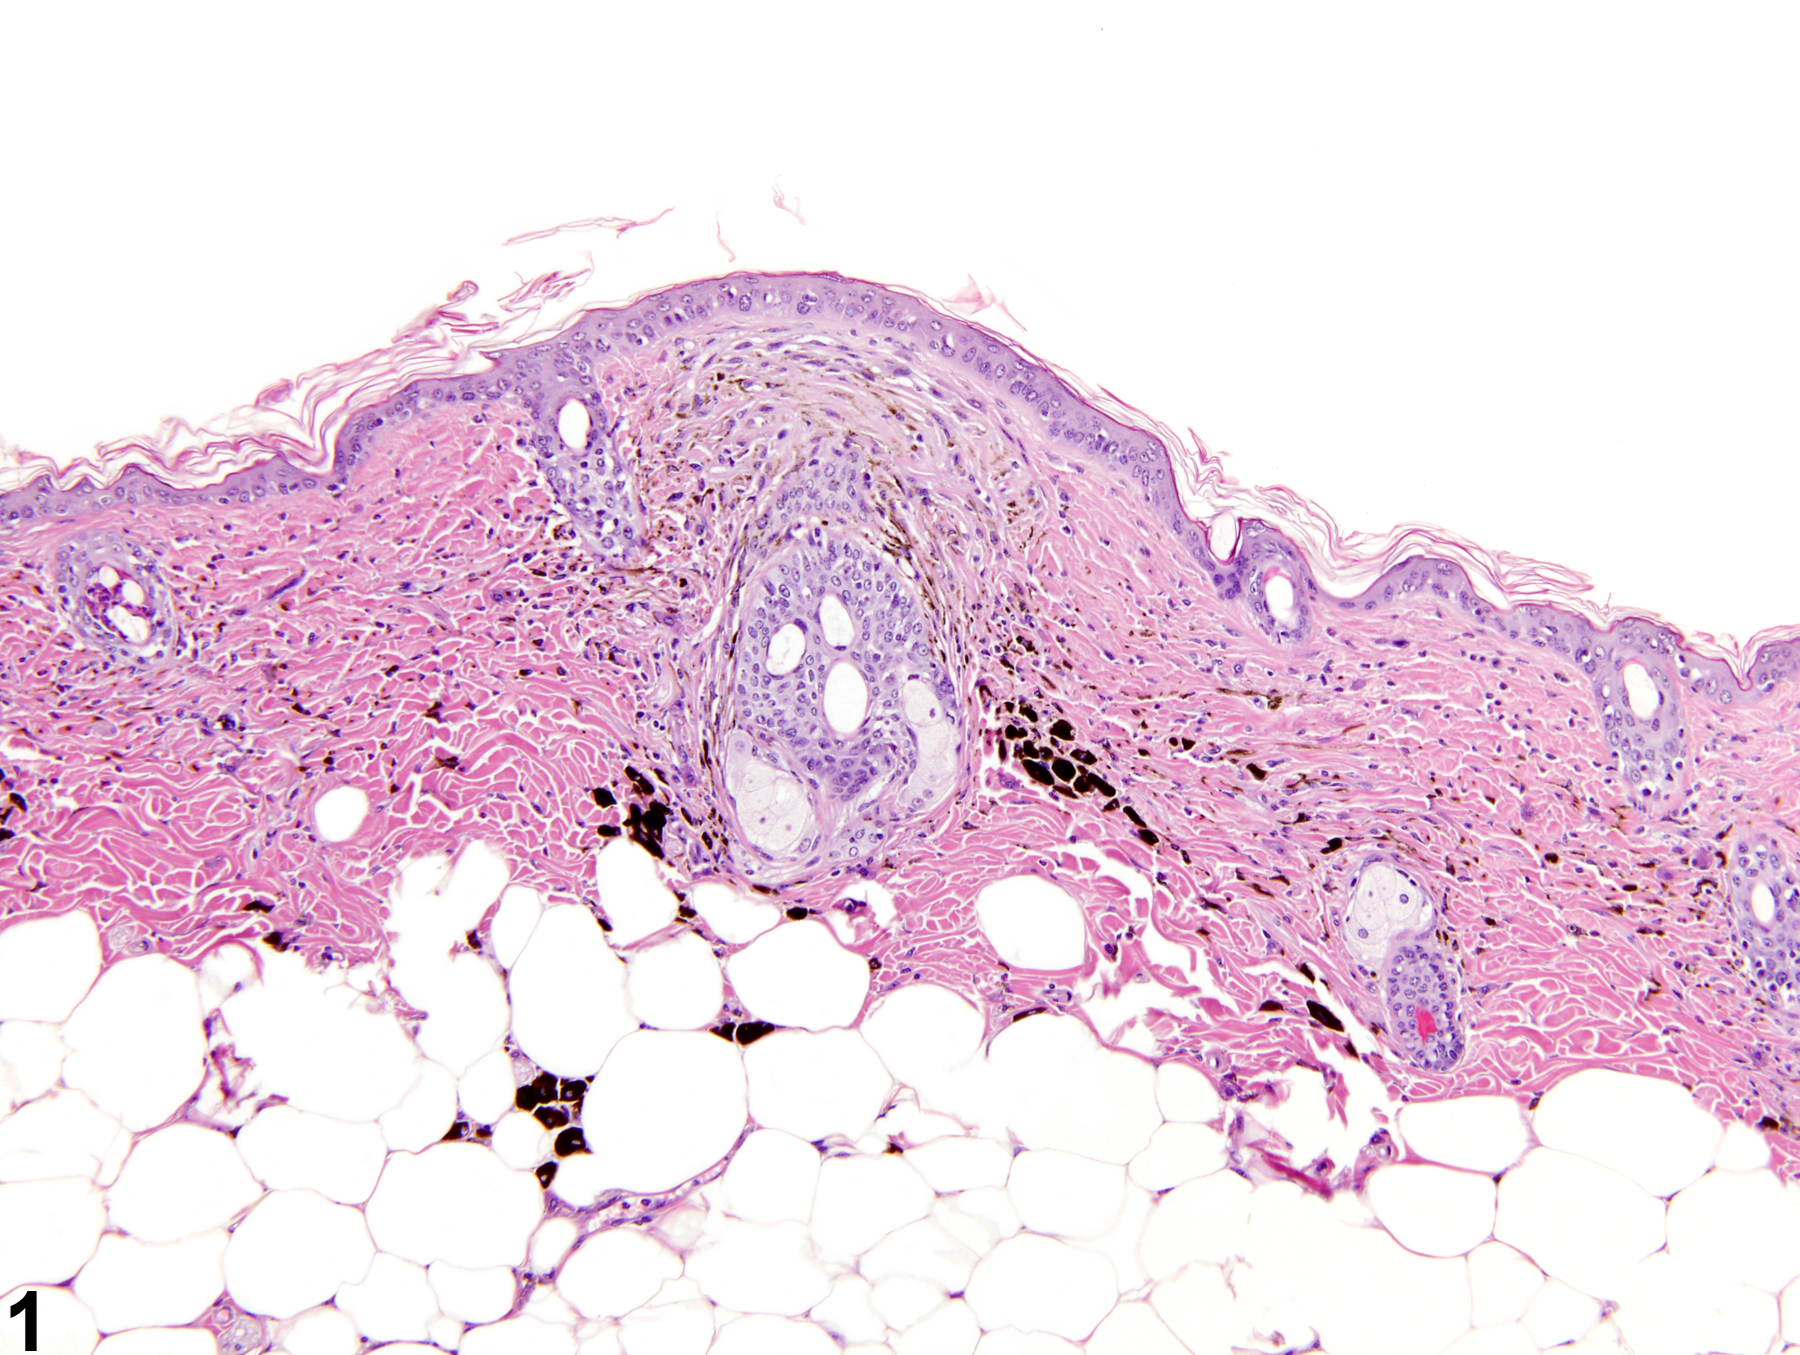 Image of pigment in the skin from a male B6C3F1 mouse in a chronic study